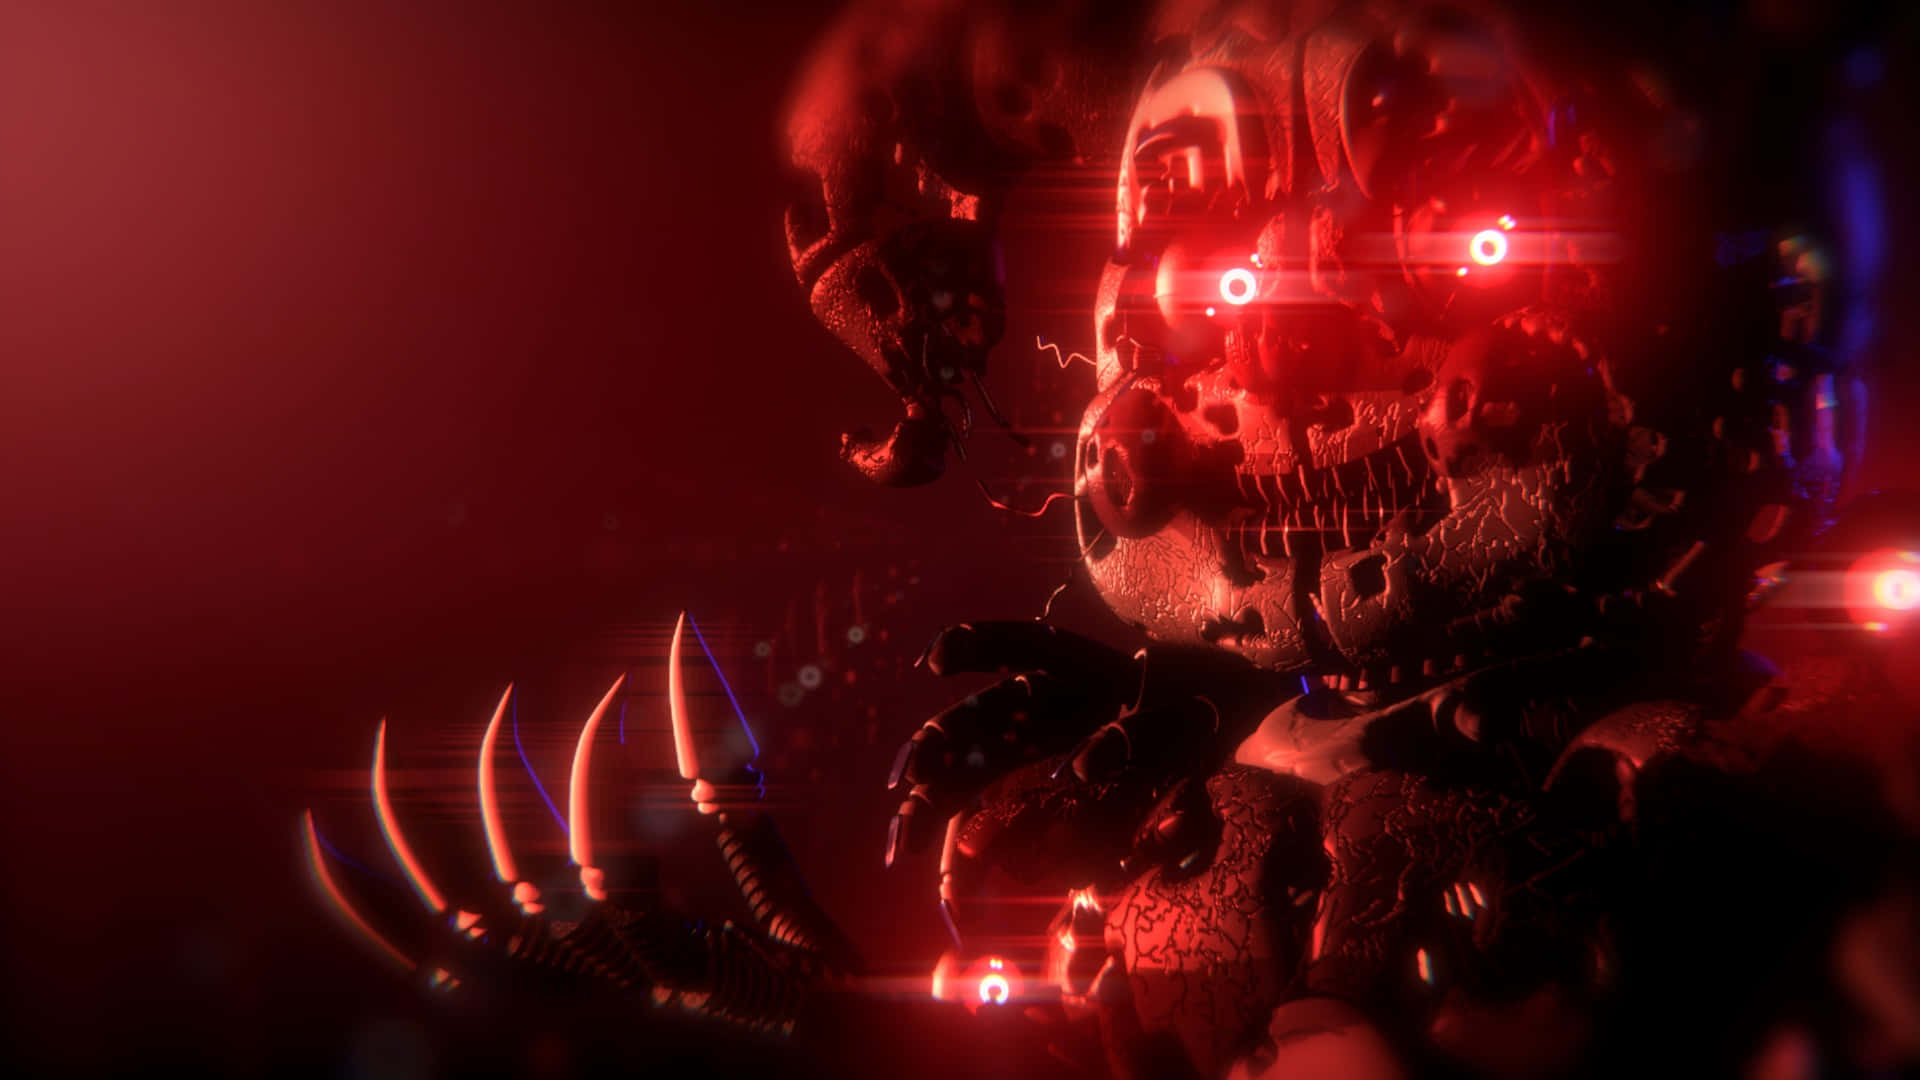 Frightening Five Nights at Freddy's Characters in Action Wallpaper